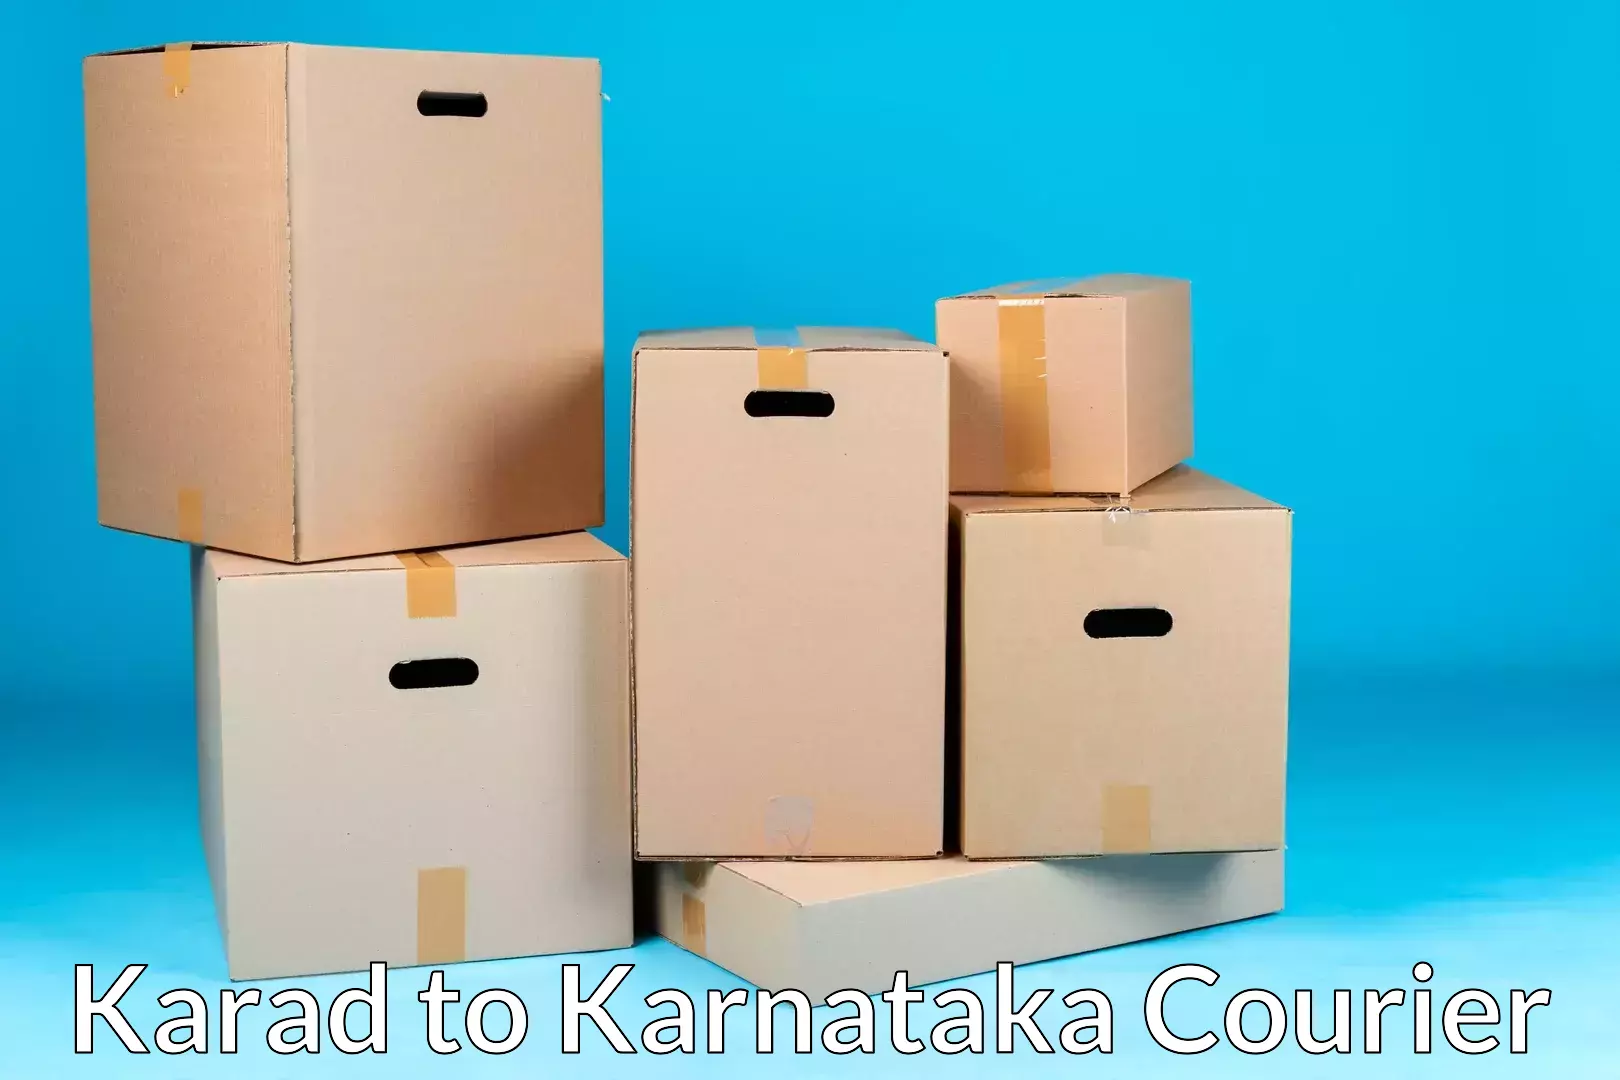 Quality relocation services in Karad to Bangarapet